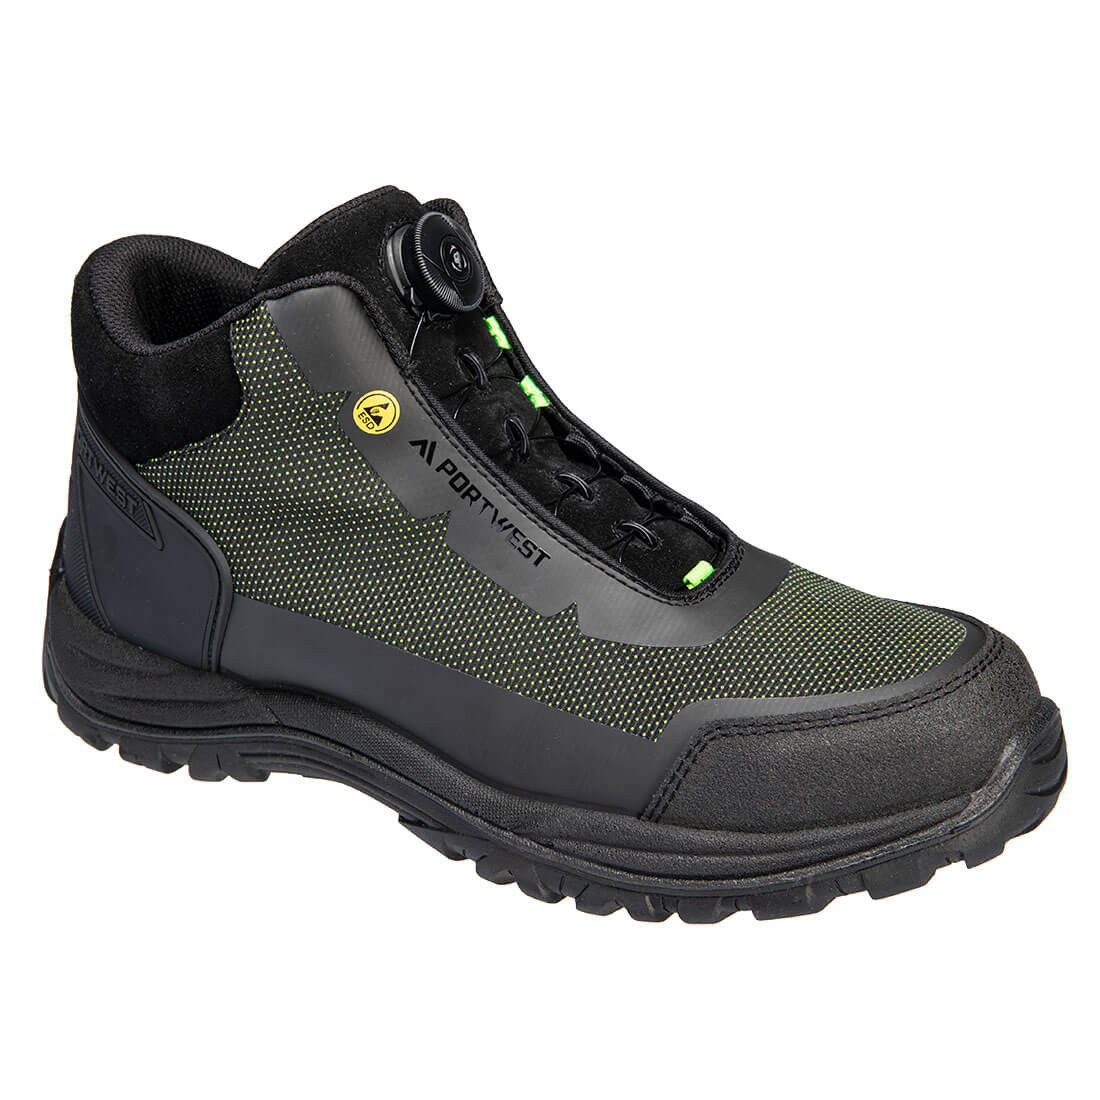 Girder Composite Mid Boot S3S ESD SR FO - Les chaussures de protection